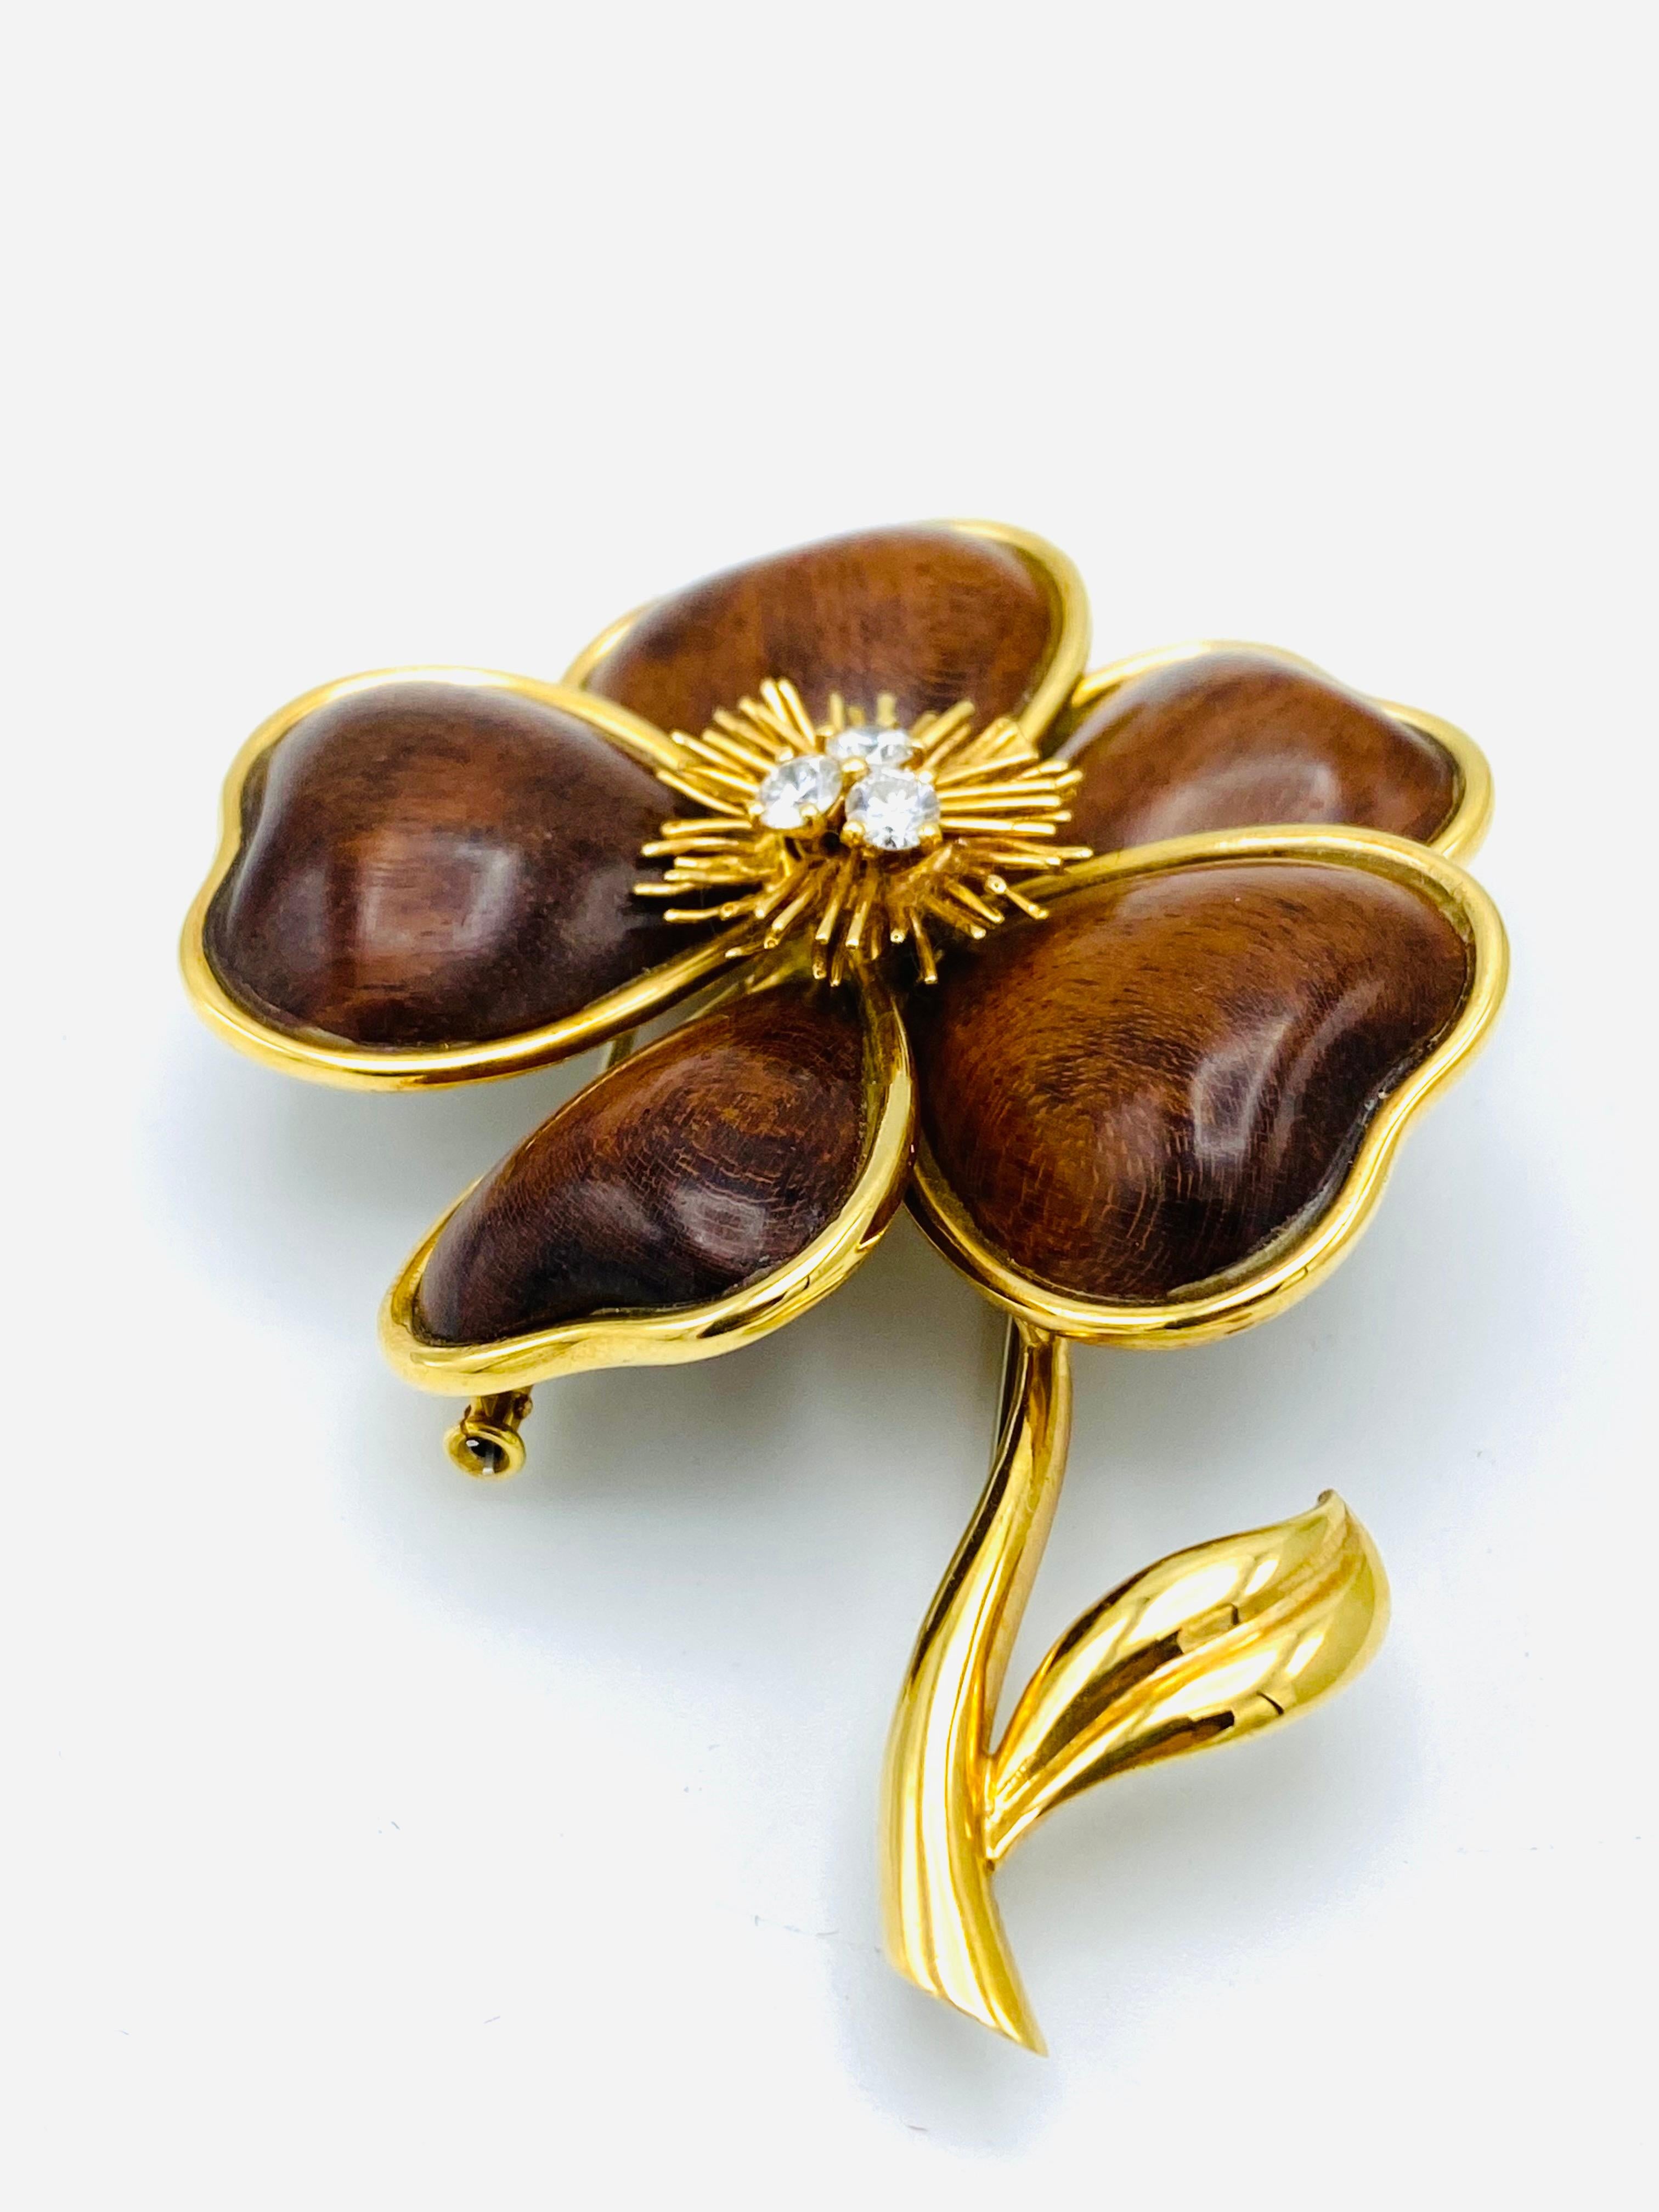 Product details:
Created by Van Cleef and Arpels in France in 1972’s. 
It is made of 18K yellow gold, amourette wood and accented with three round brilliant cut diamonds, total weight is 0.45 carat.
Stamped with VCA maker’s mark, hallmark for 18K